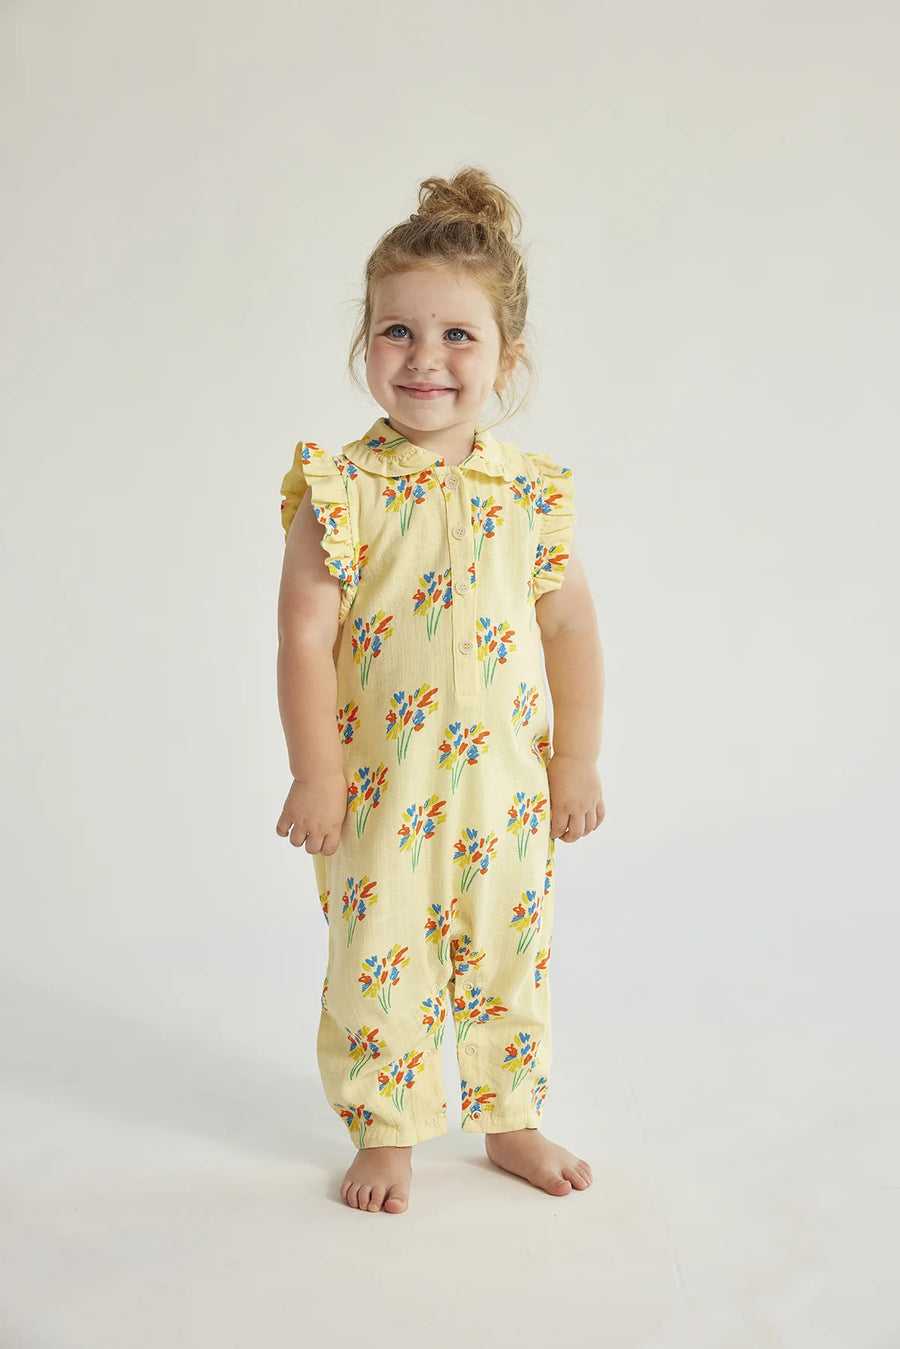 Baby Woven Overall | Fireworks